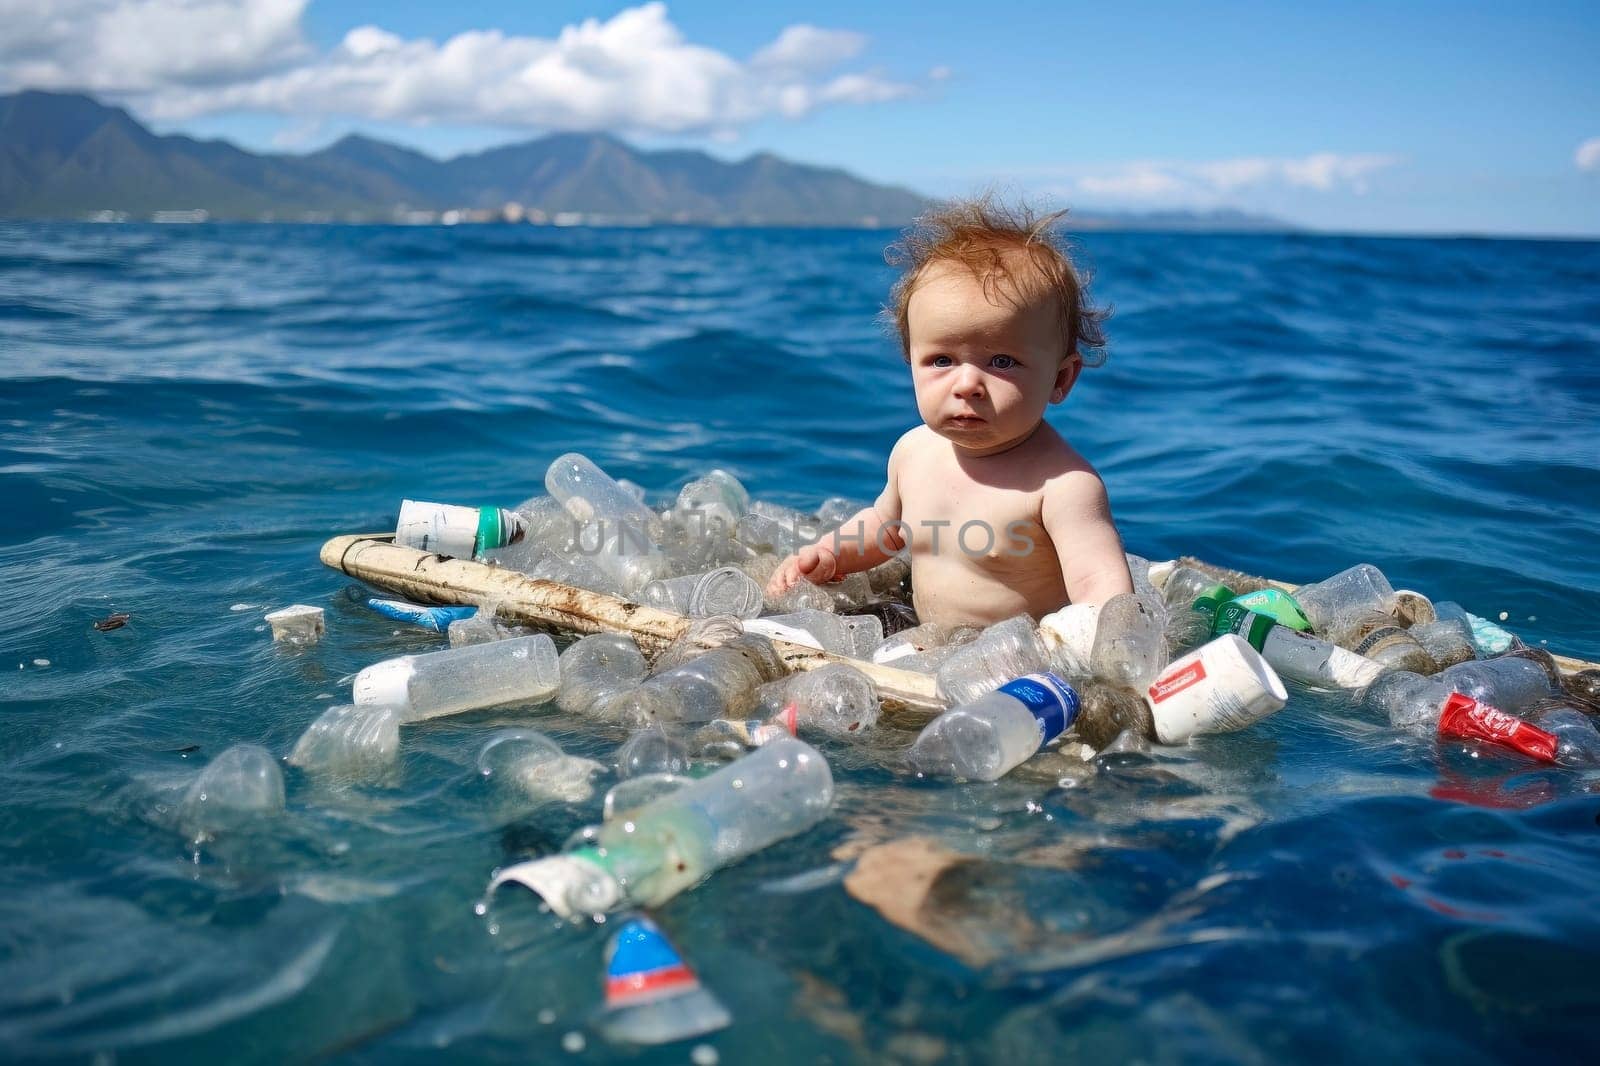 A Caucasian child bathes in the sea amongst trash, symbolizing environmental pollution